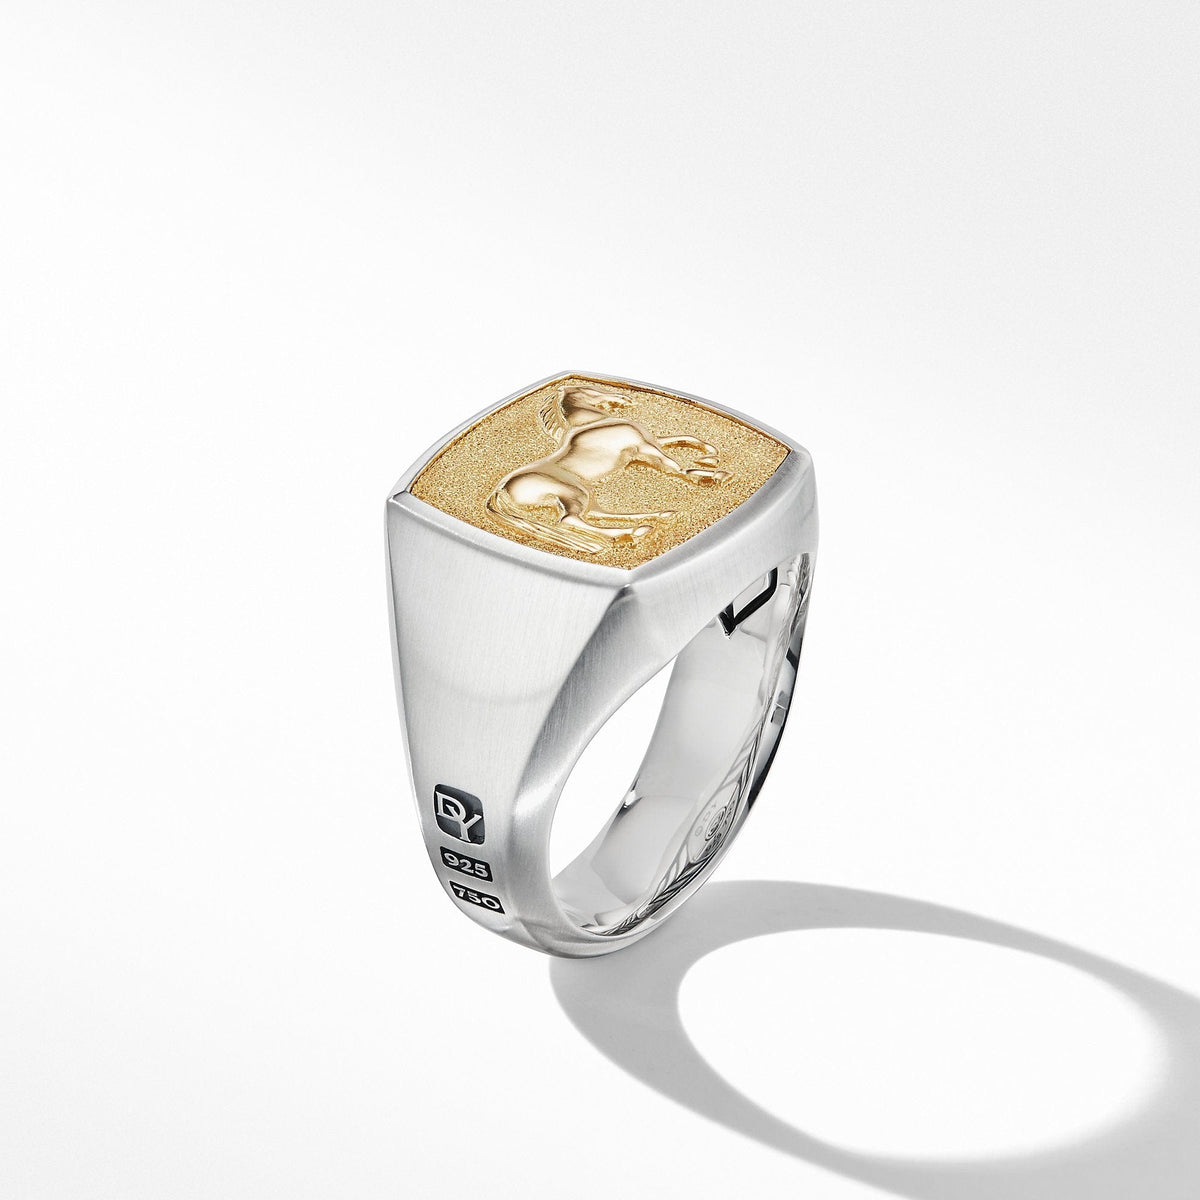 Petrvs® Horse Signet Ring with 18K Yellow Gold